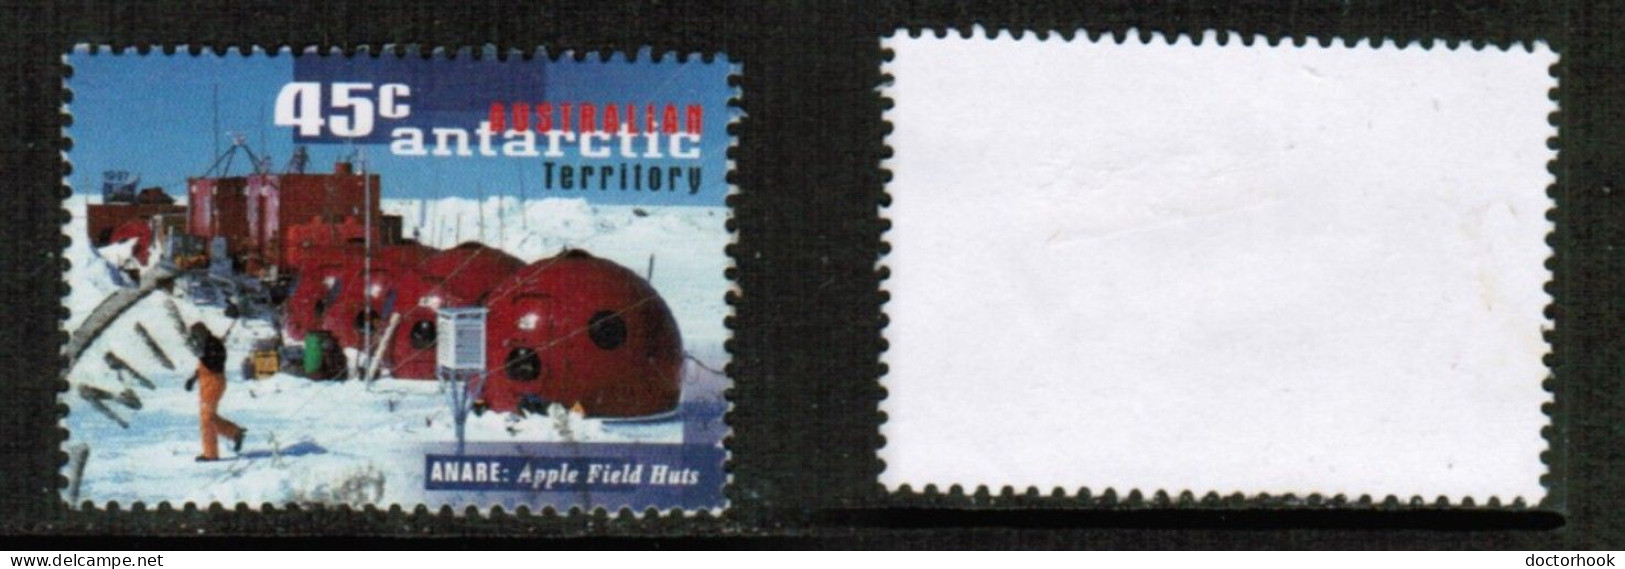 AUSTRALIAN ANTARCTIC TERRITORY   Scott # L 102 USED (CONDITION AS PER SCAN) (Stamp Scan # 929-10) - Oblitérés